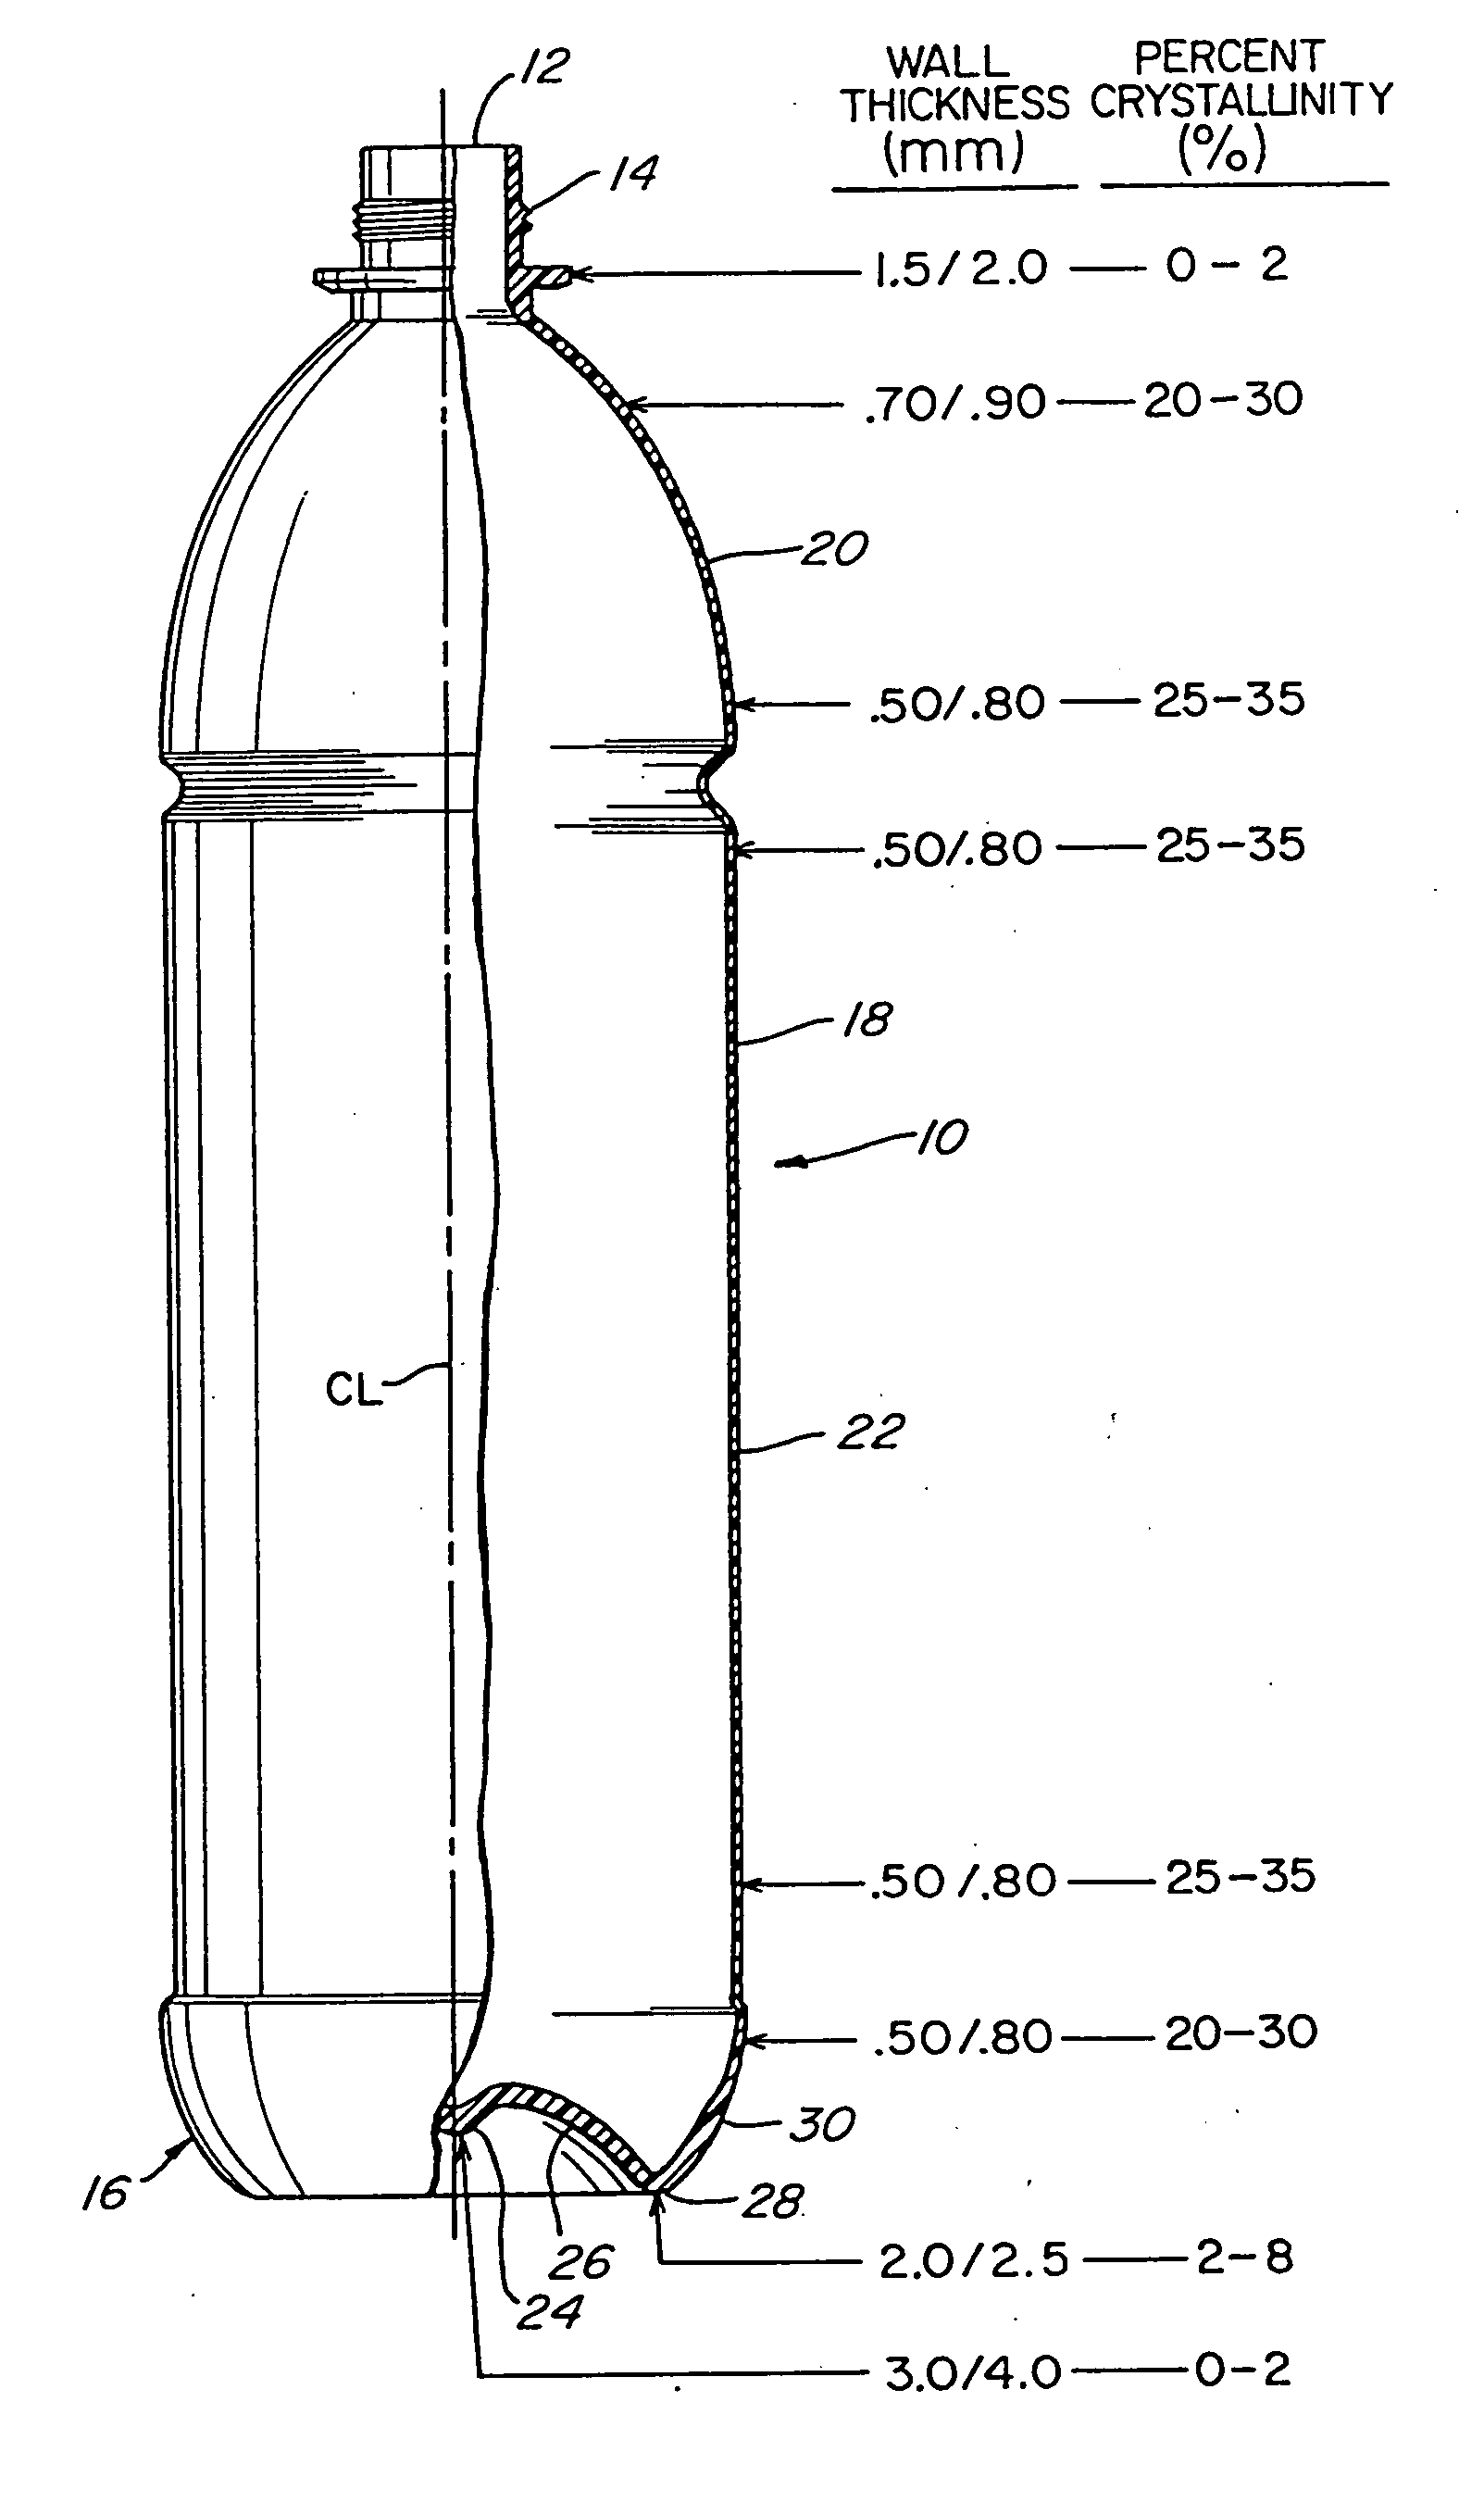 Method of forming container with high-crystallinity sidewall and low-crystallinity base